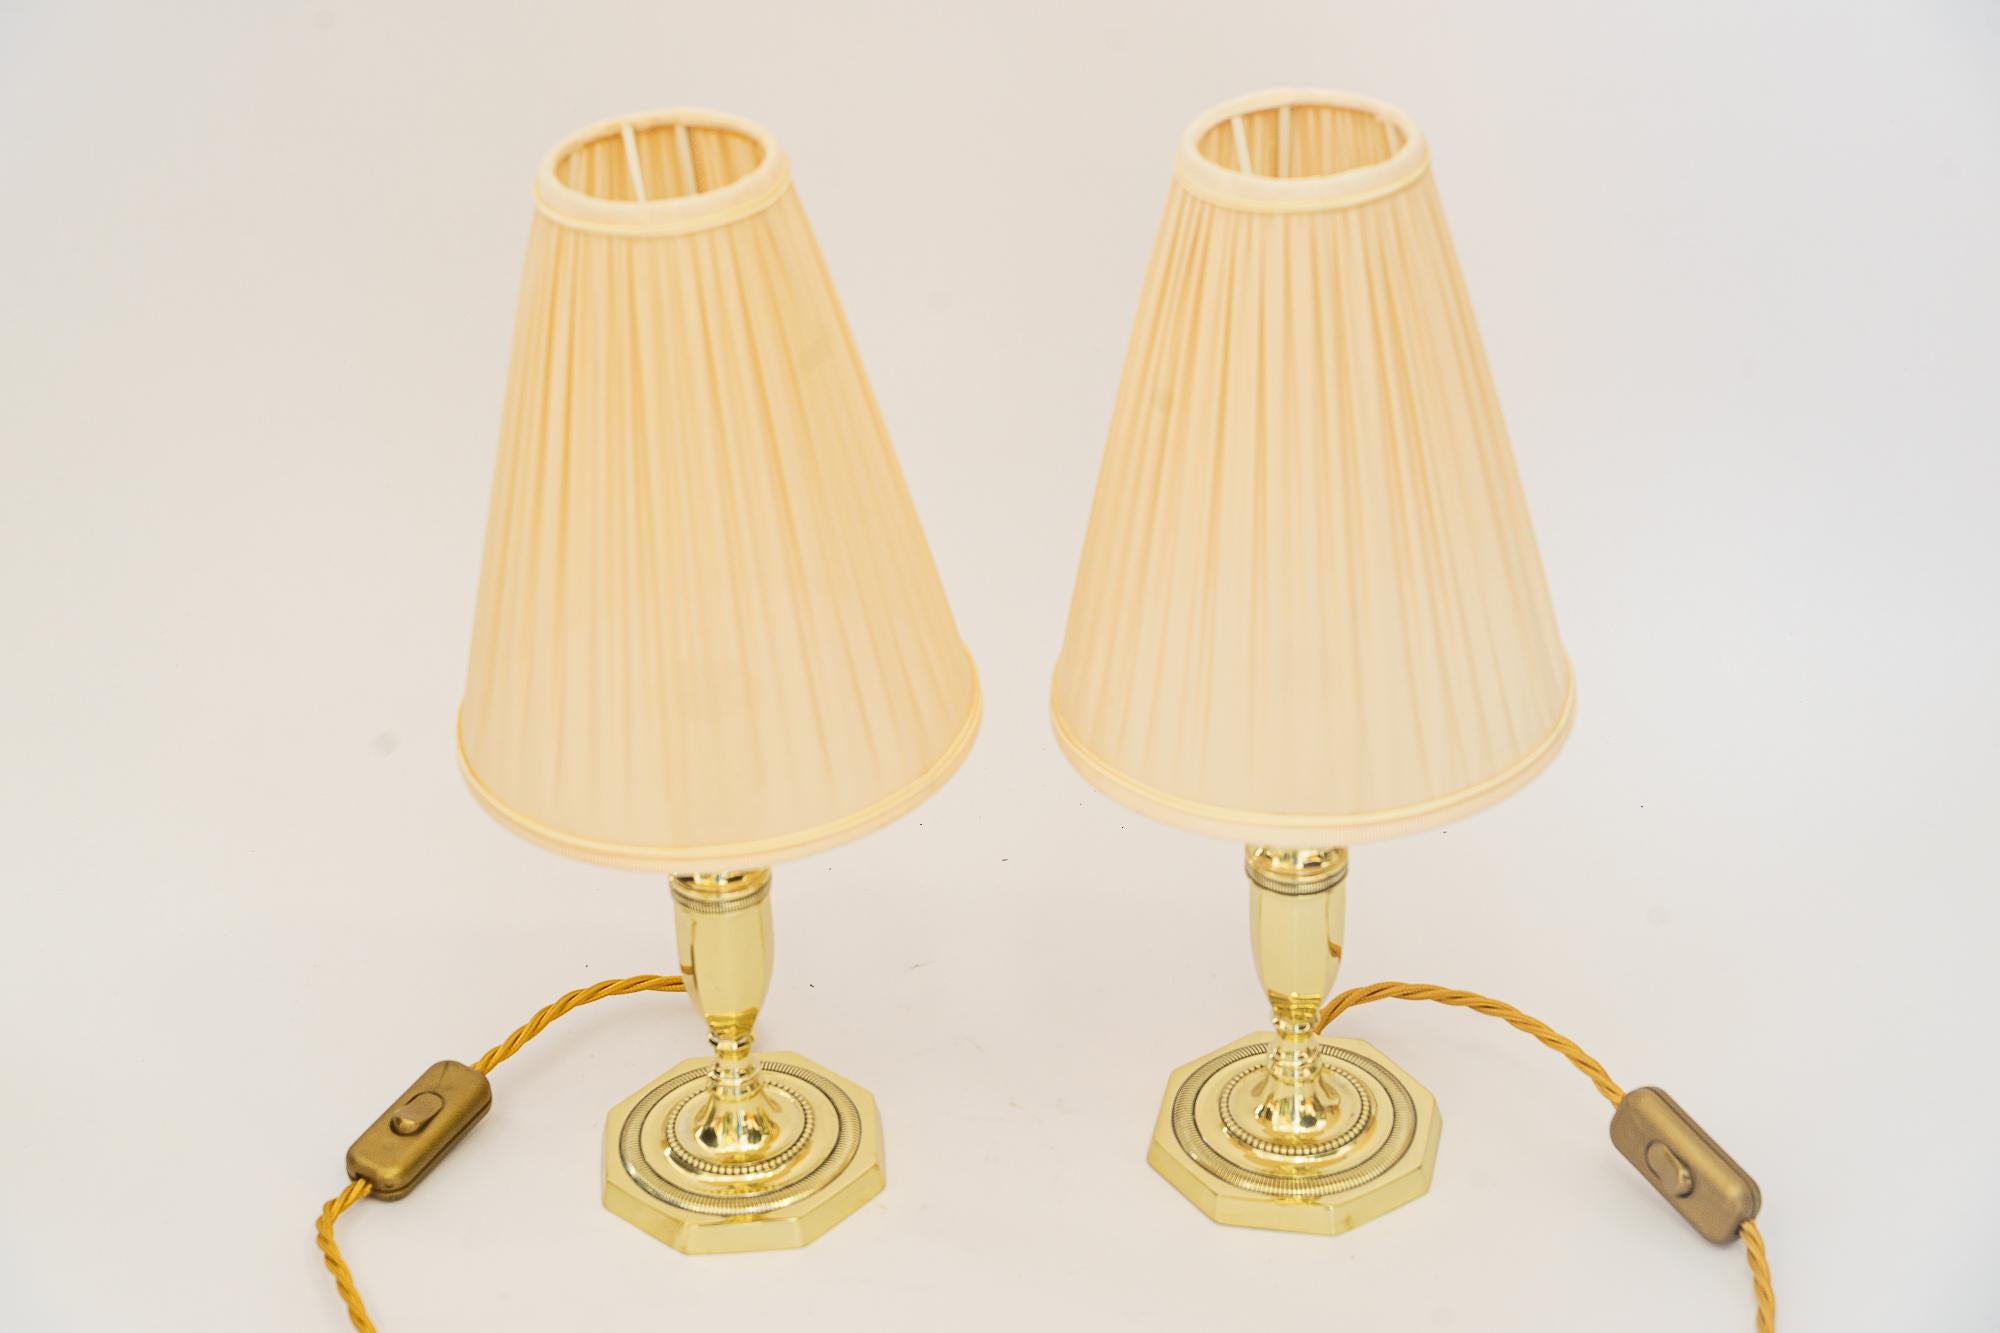 2 Art Deco table lamps with fabric shades vienna around 1920s
Polished and stove enameled
The fabric shades are replaced ( new )